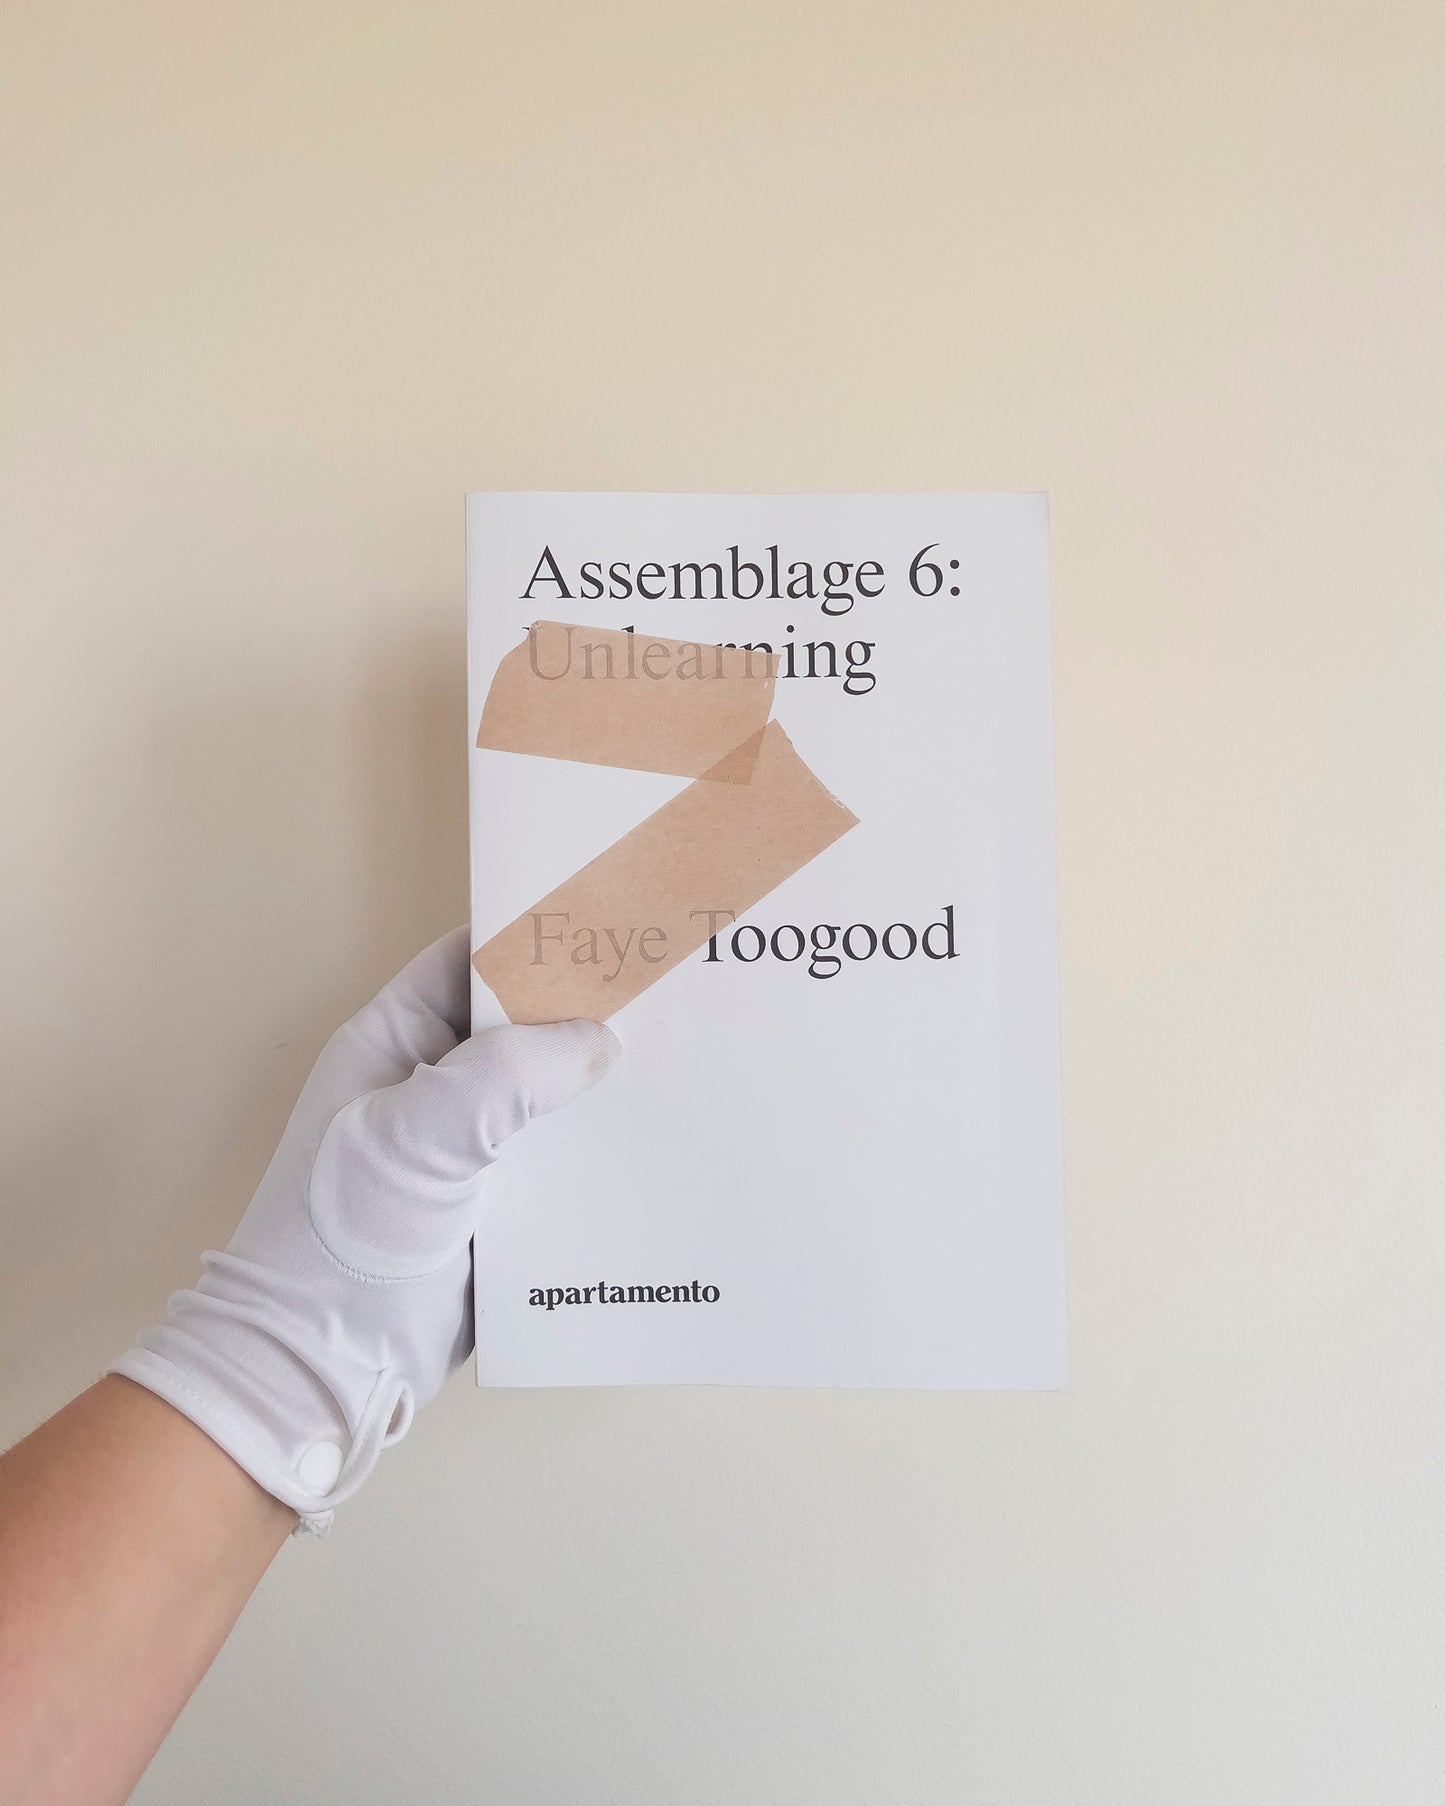 Assemblage by Faye Toogood